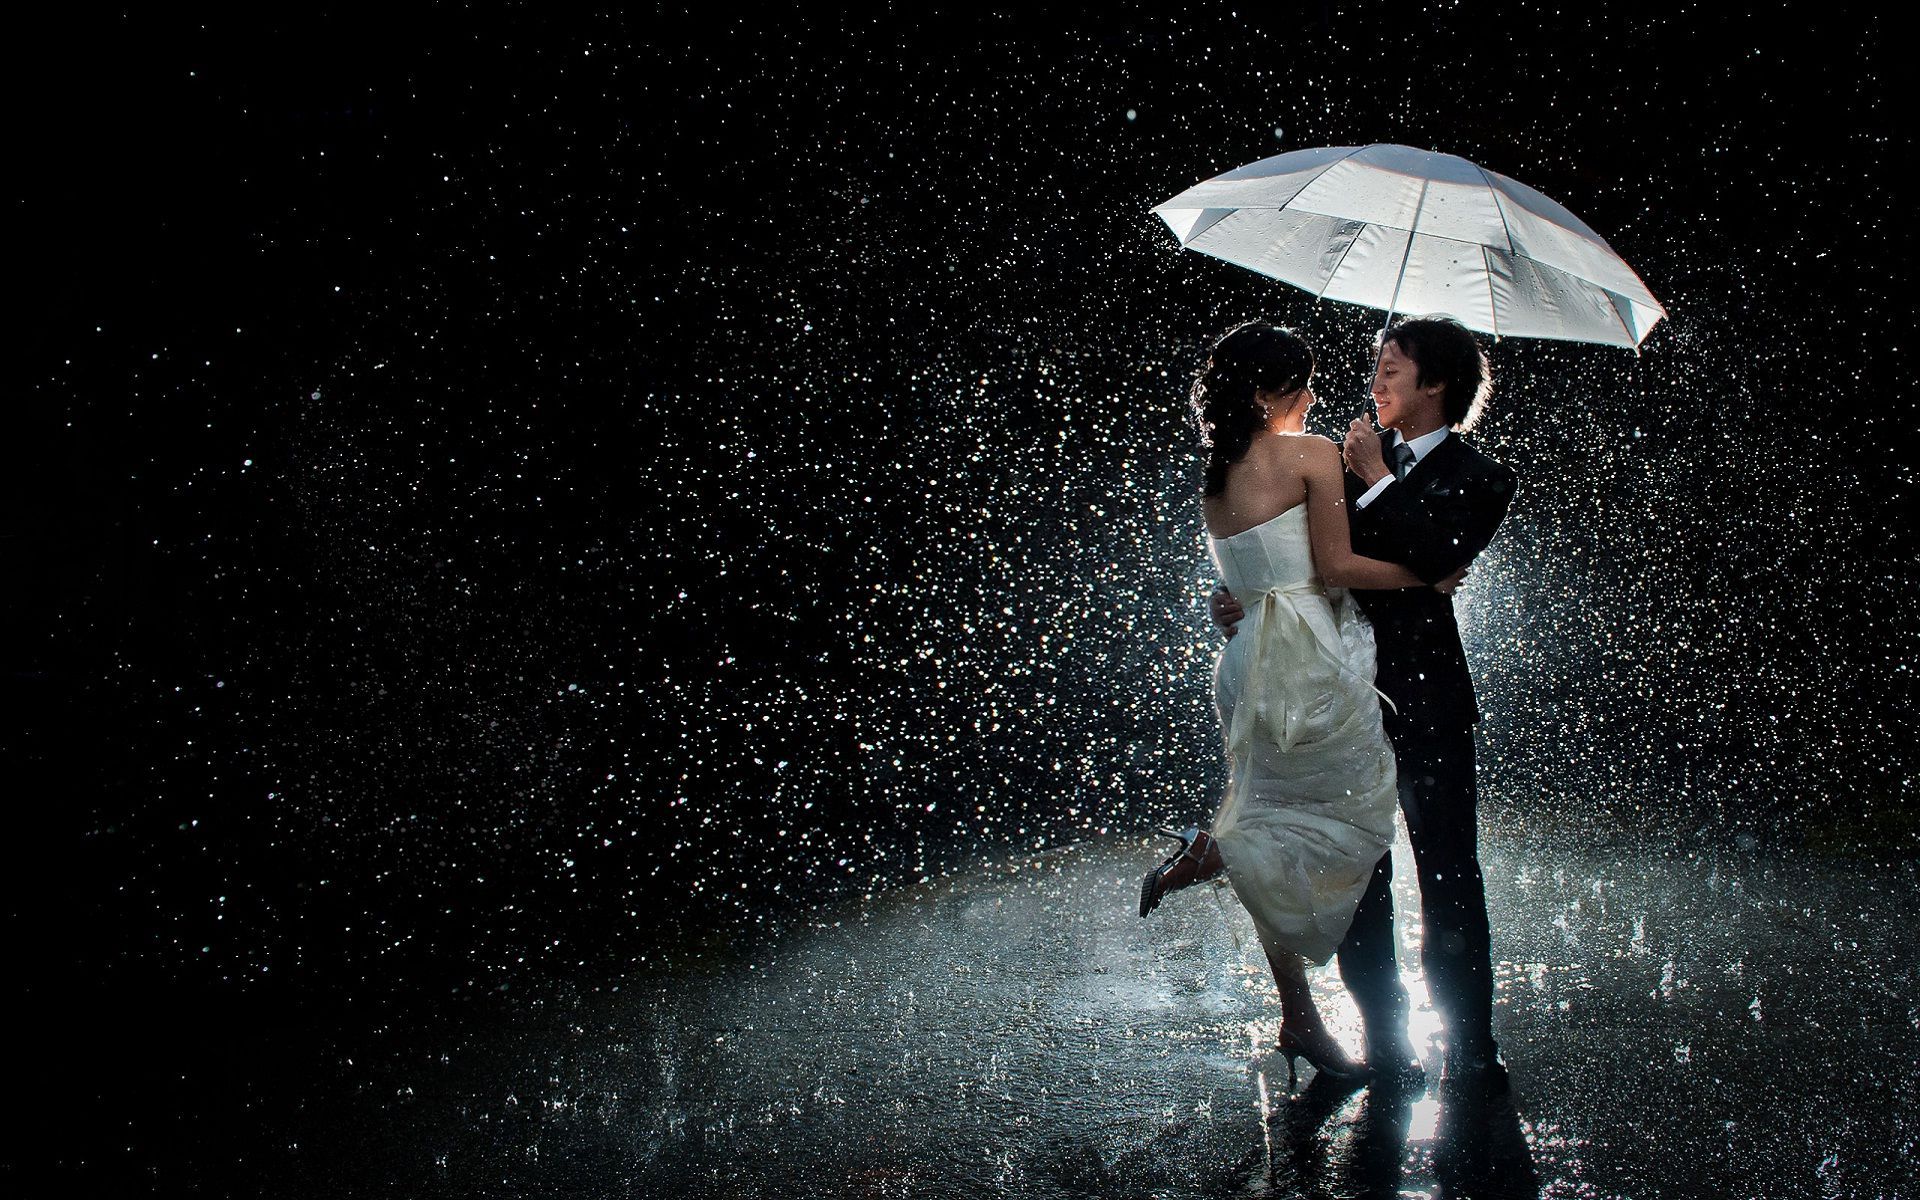 Romantic Couple Love In Rain At Night Wallpapers.